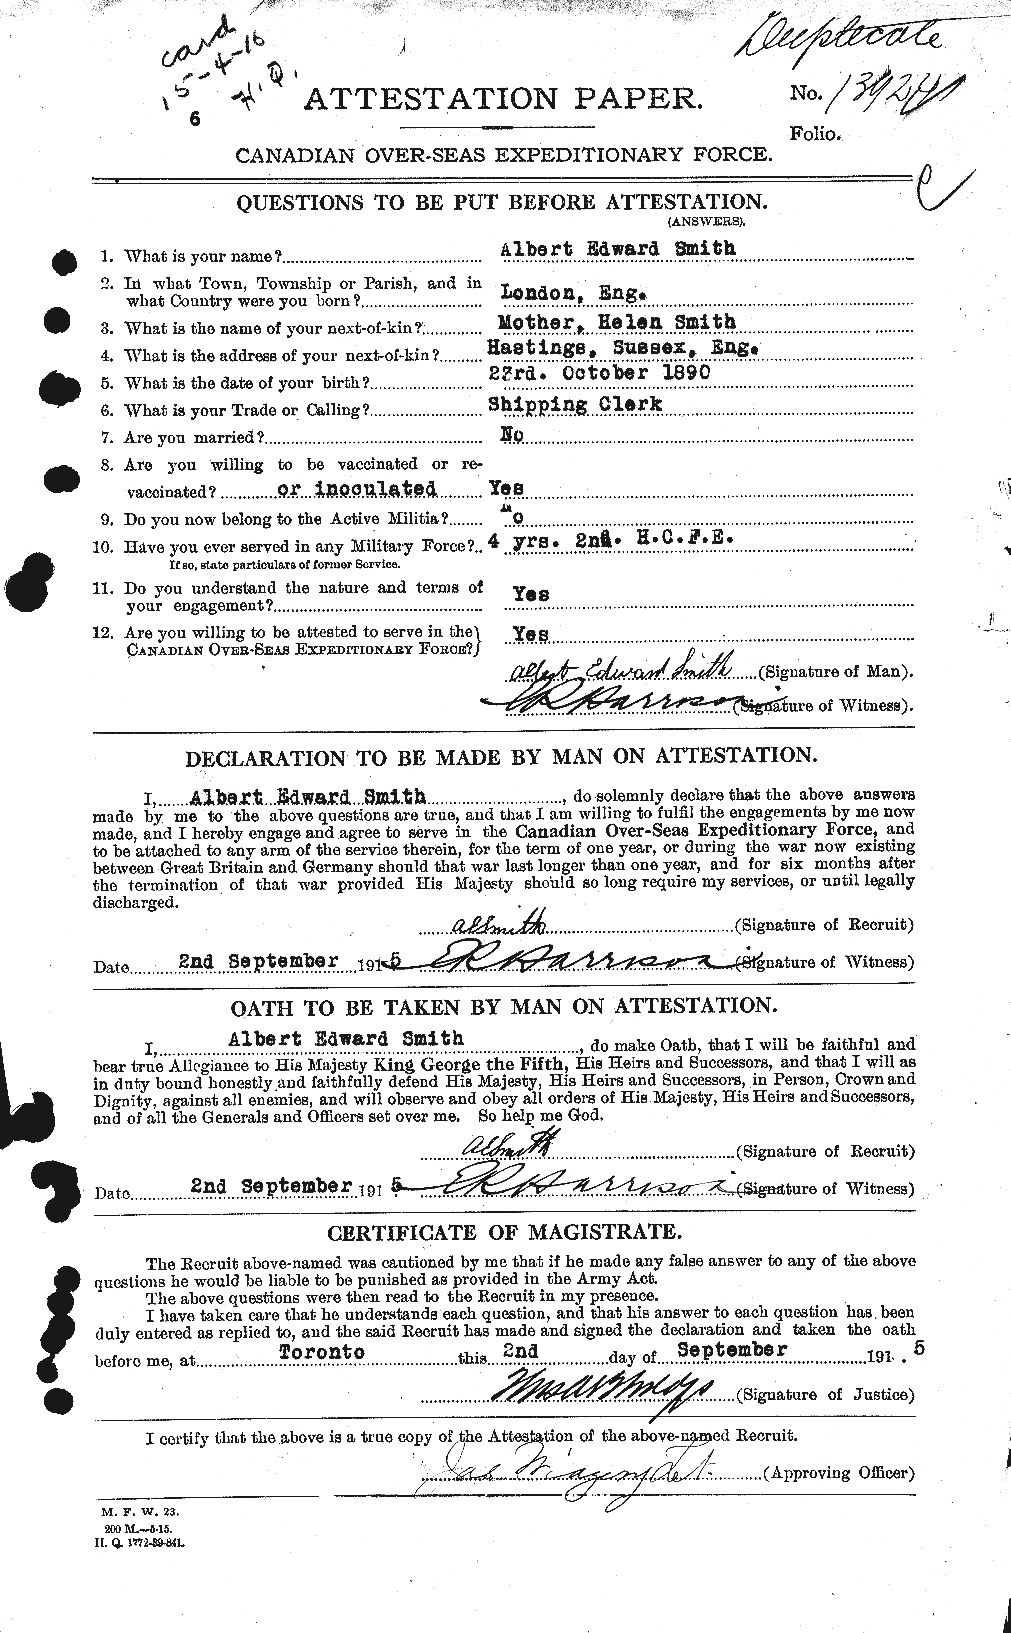 Personnel Records of the First World War - CEF 098949a